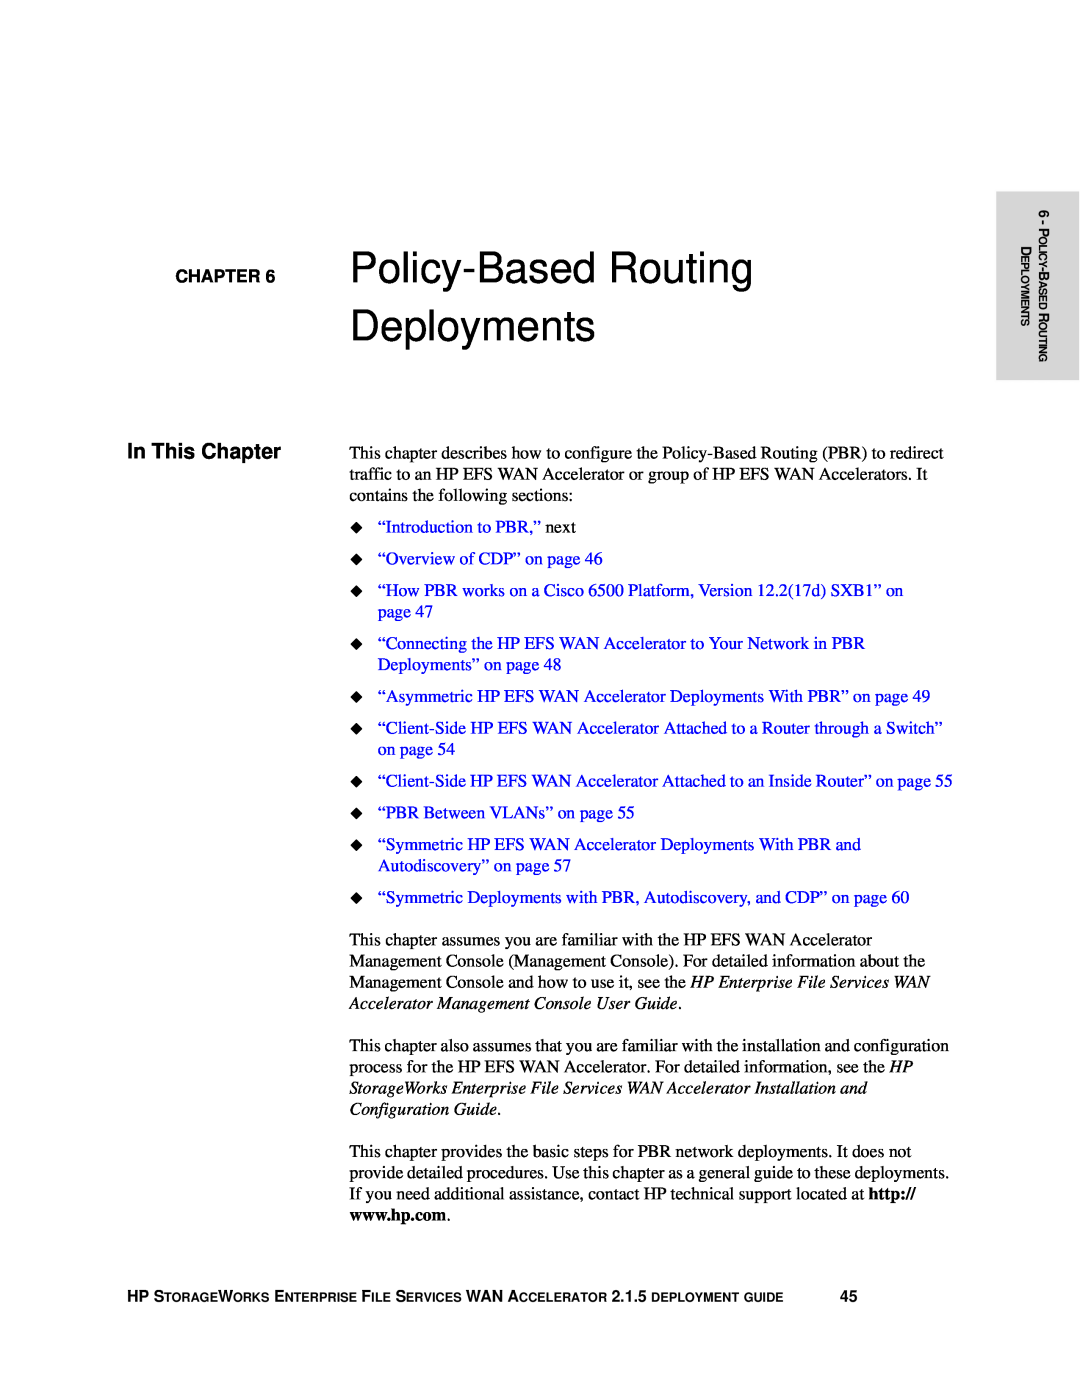 HP Enterprise File Services WAN Accelerator Policy-Based Routing Deployments, ‹ “Introduction to PBR,” next, on page 